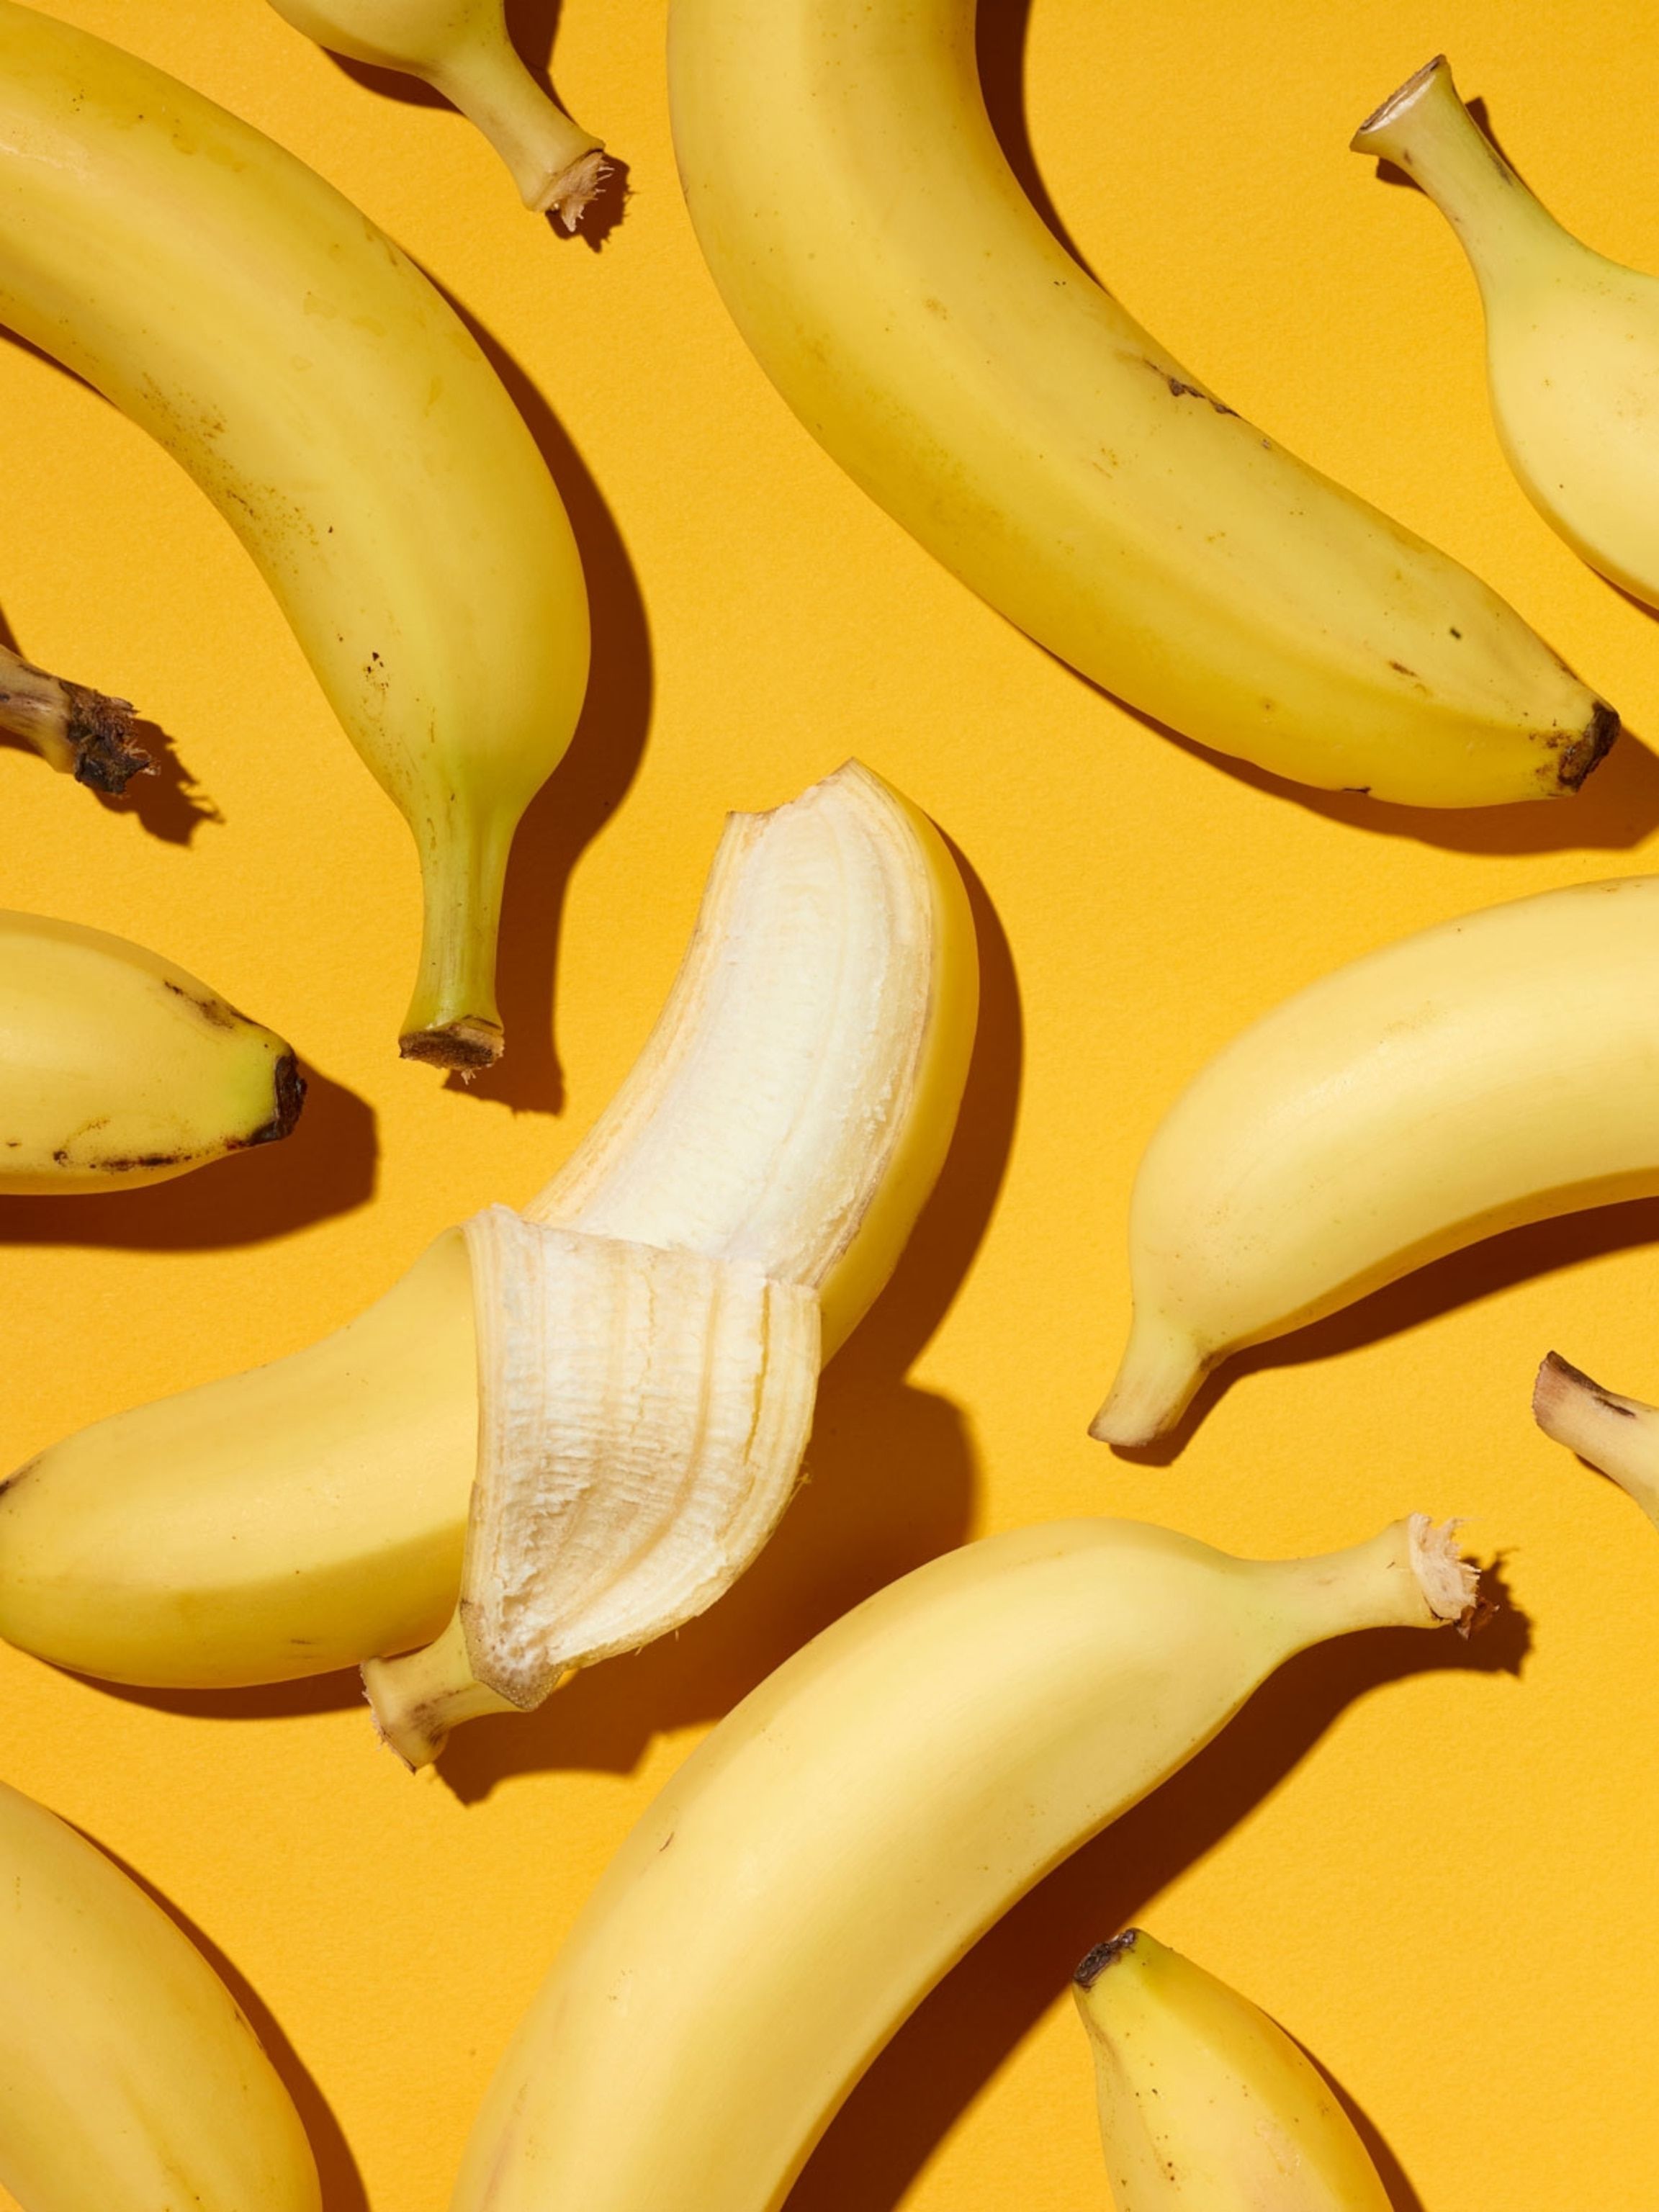 The Surprising Science Behind Bananas, the World's Most Popular Fruit